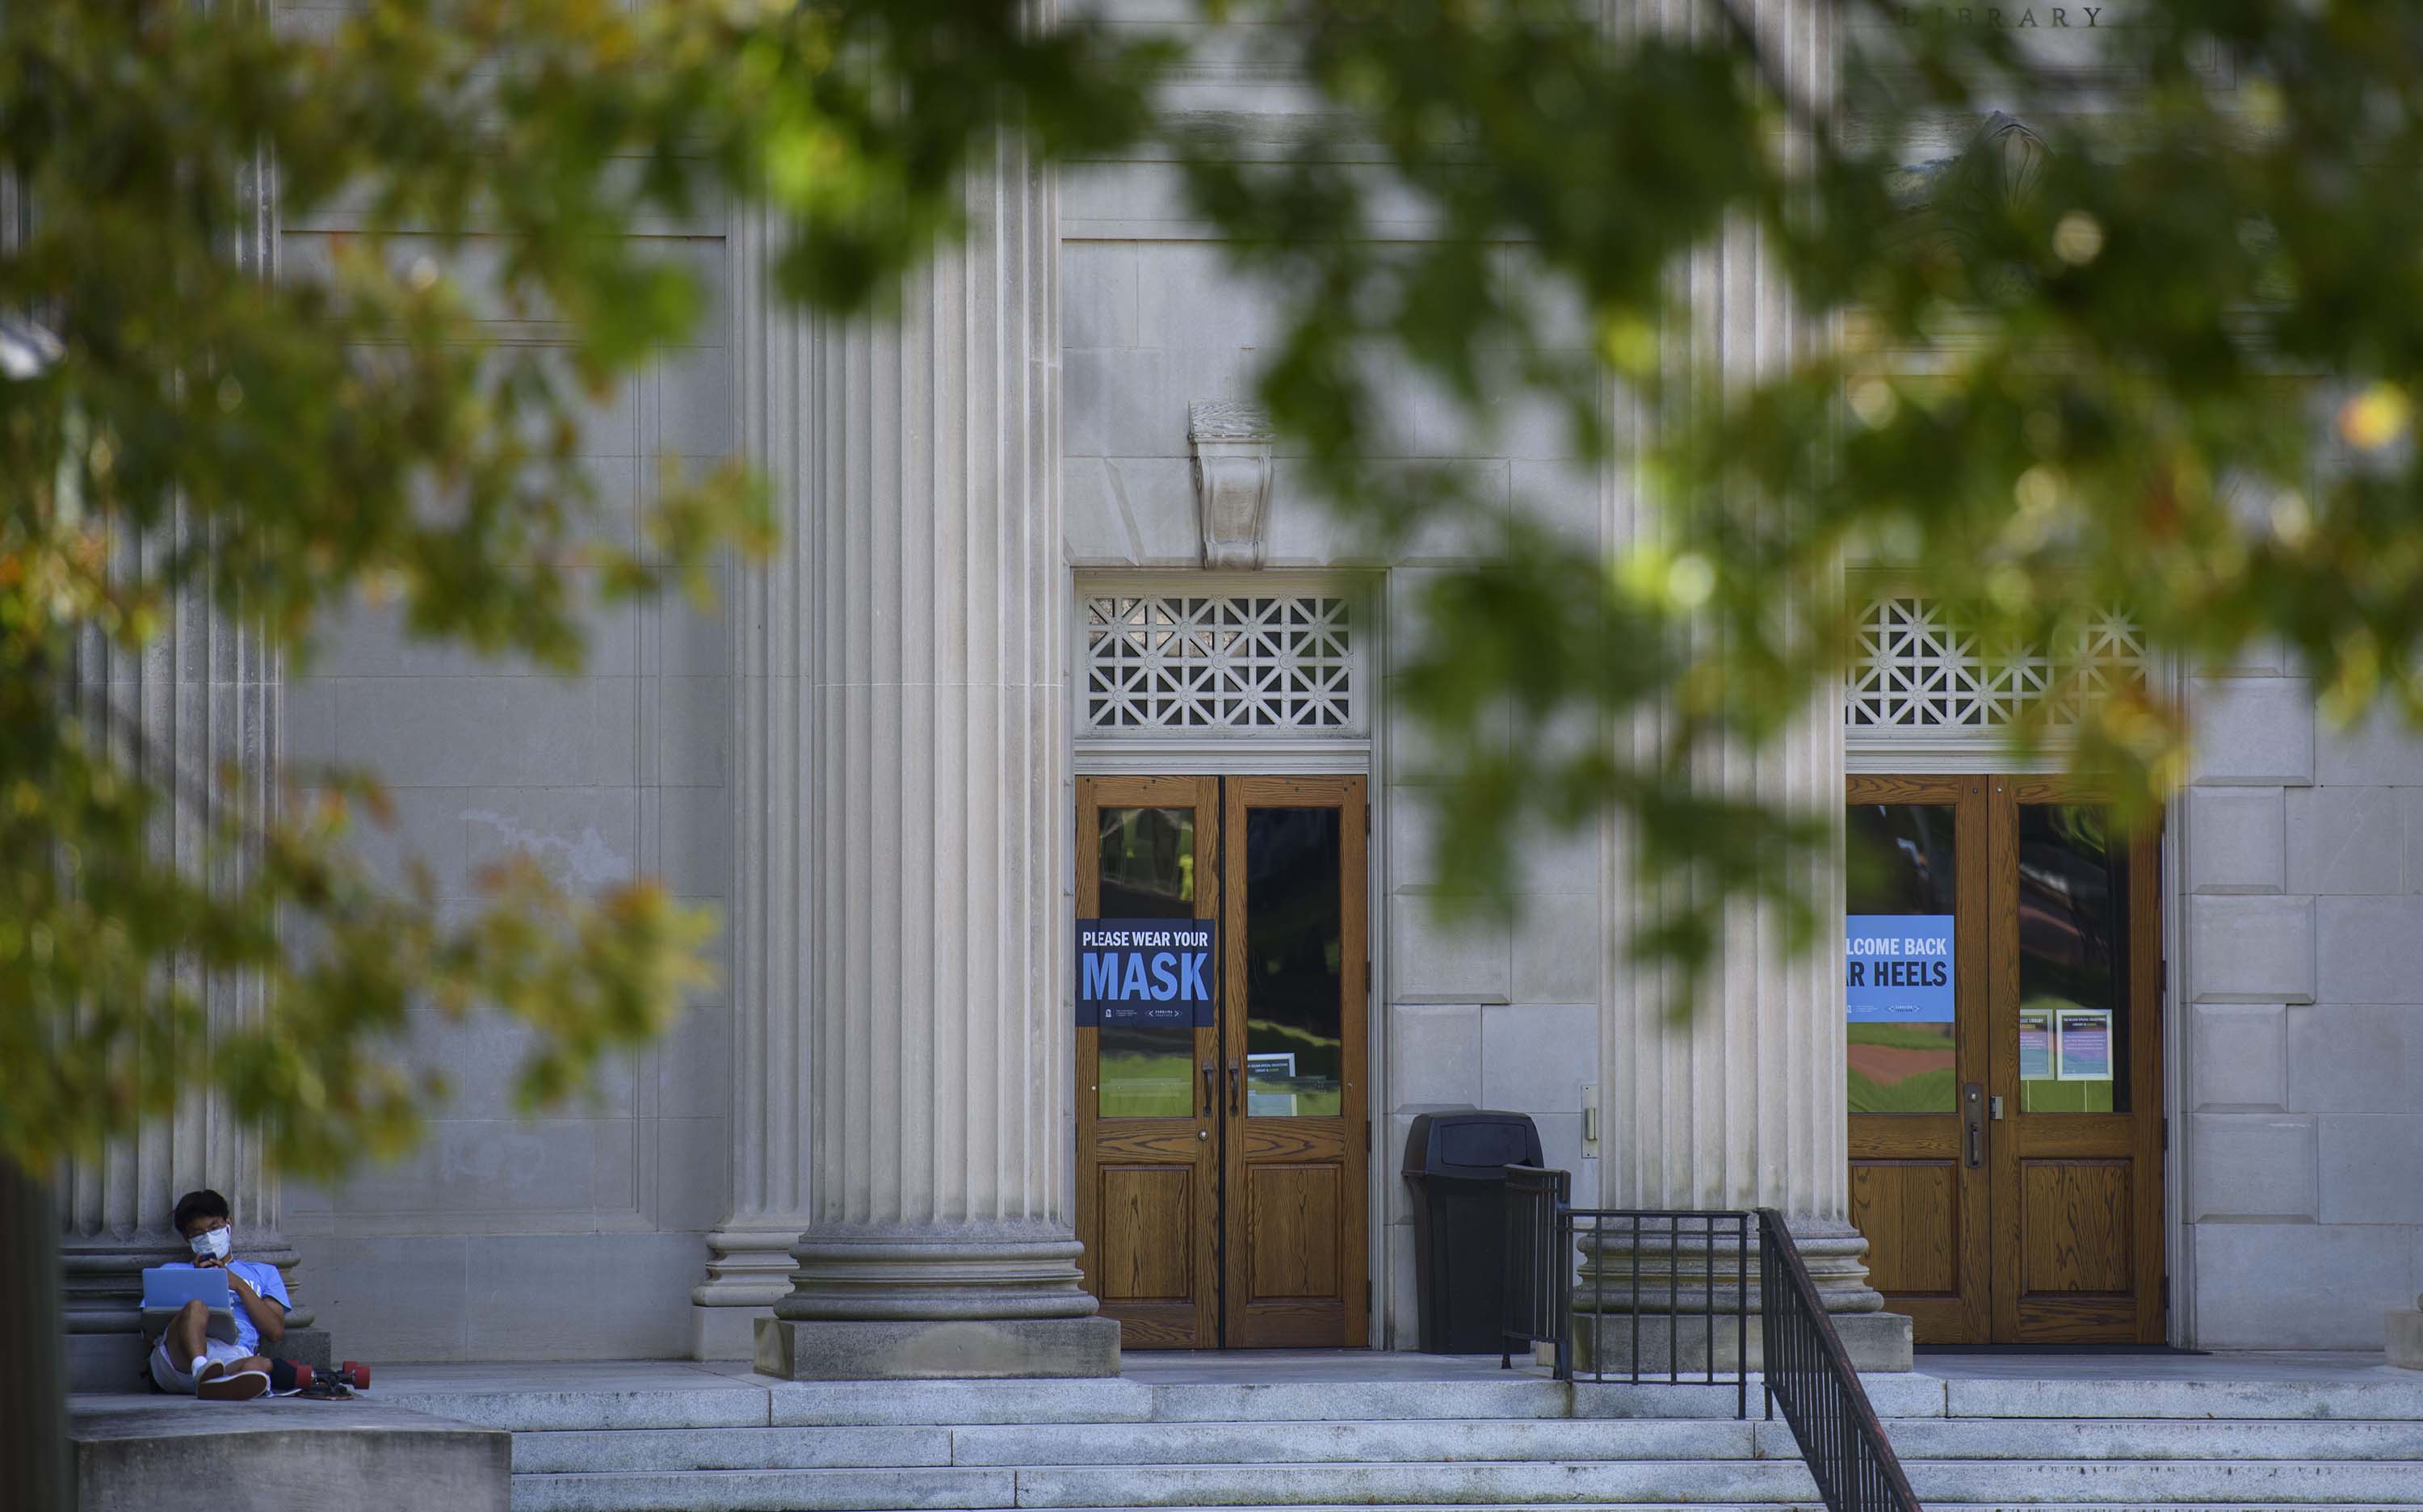 A student studies outside the closed Wilson Library on the campus of the University of North Carolina at Chapel Hill on August 18, in Chapel Hill, North Carolina.